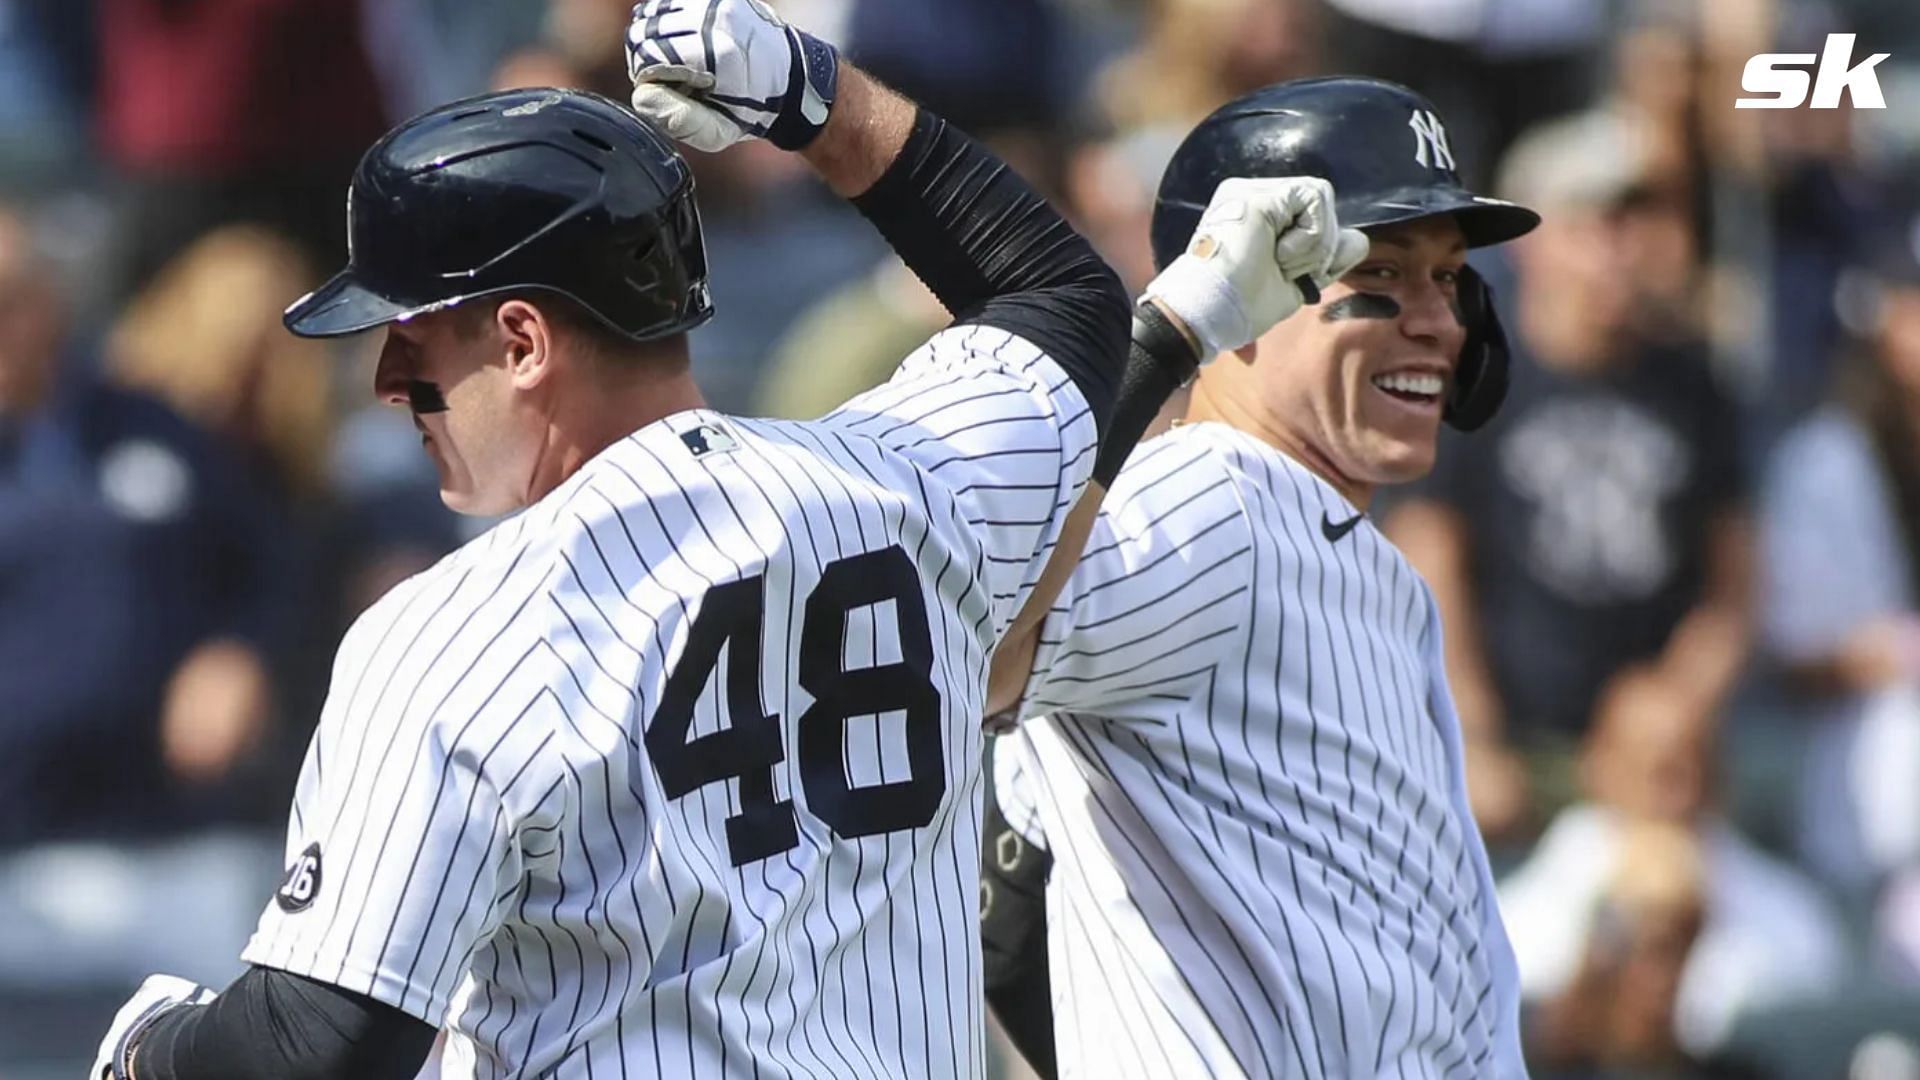 Anthony Rizzo praises beloved teammate Aaron Judge: “He'll bail